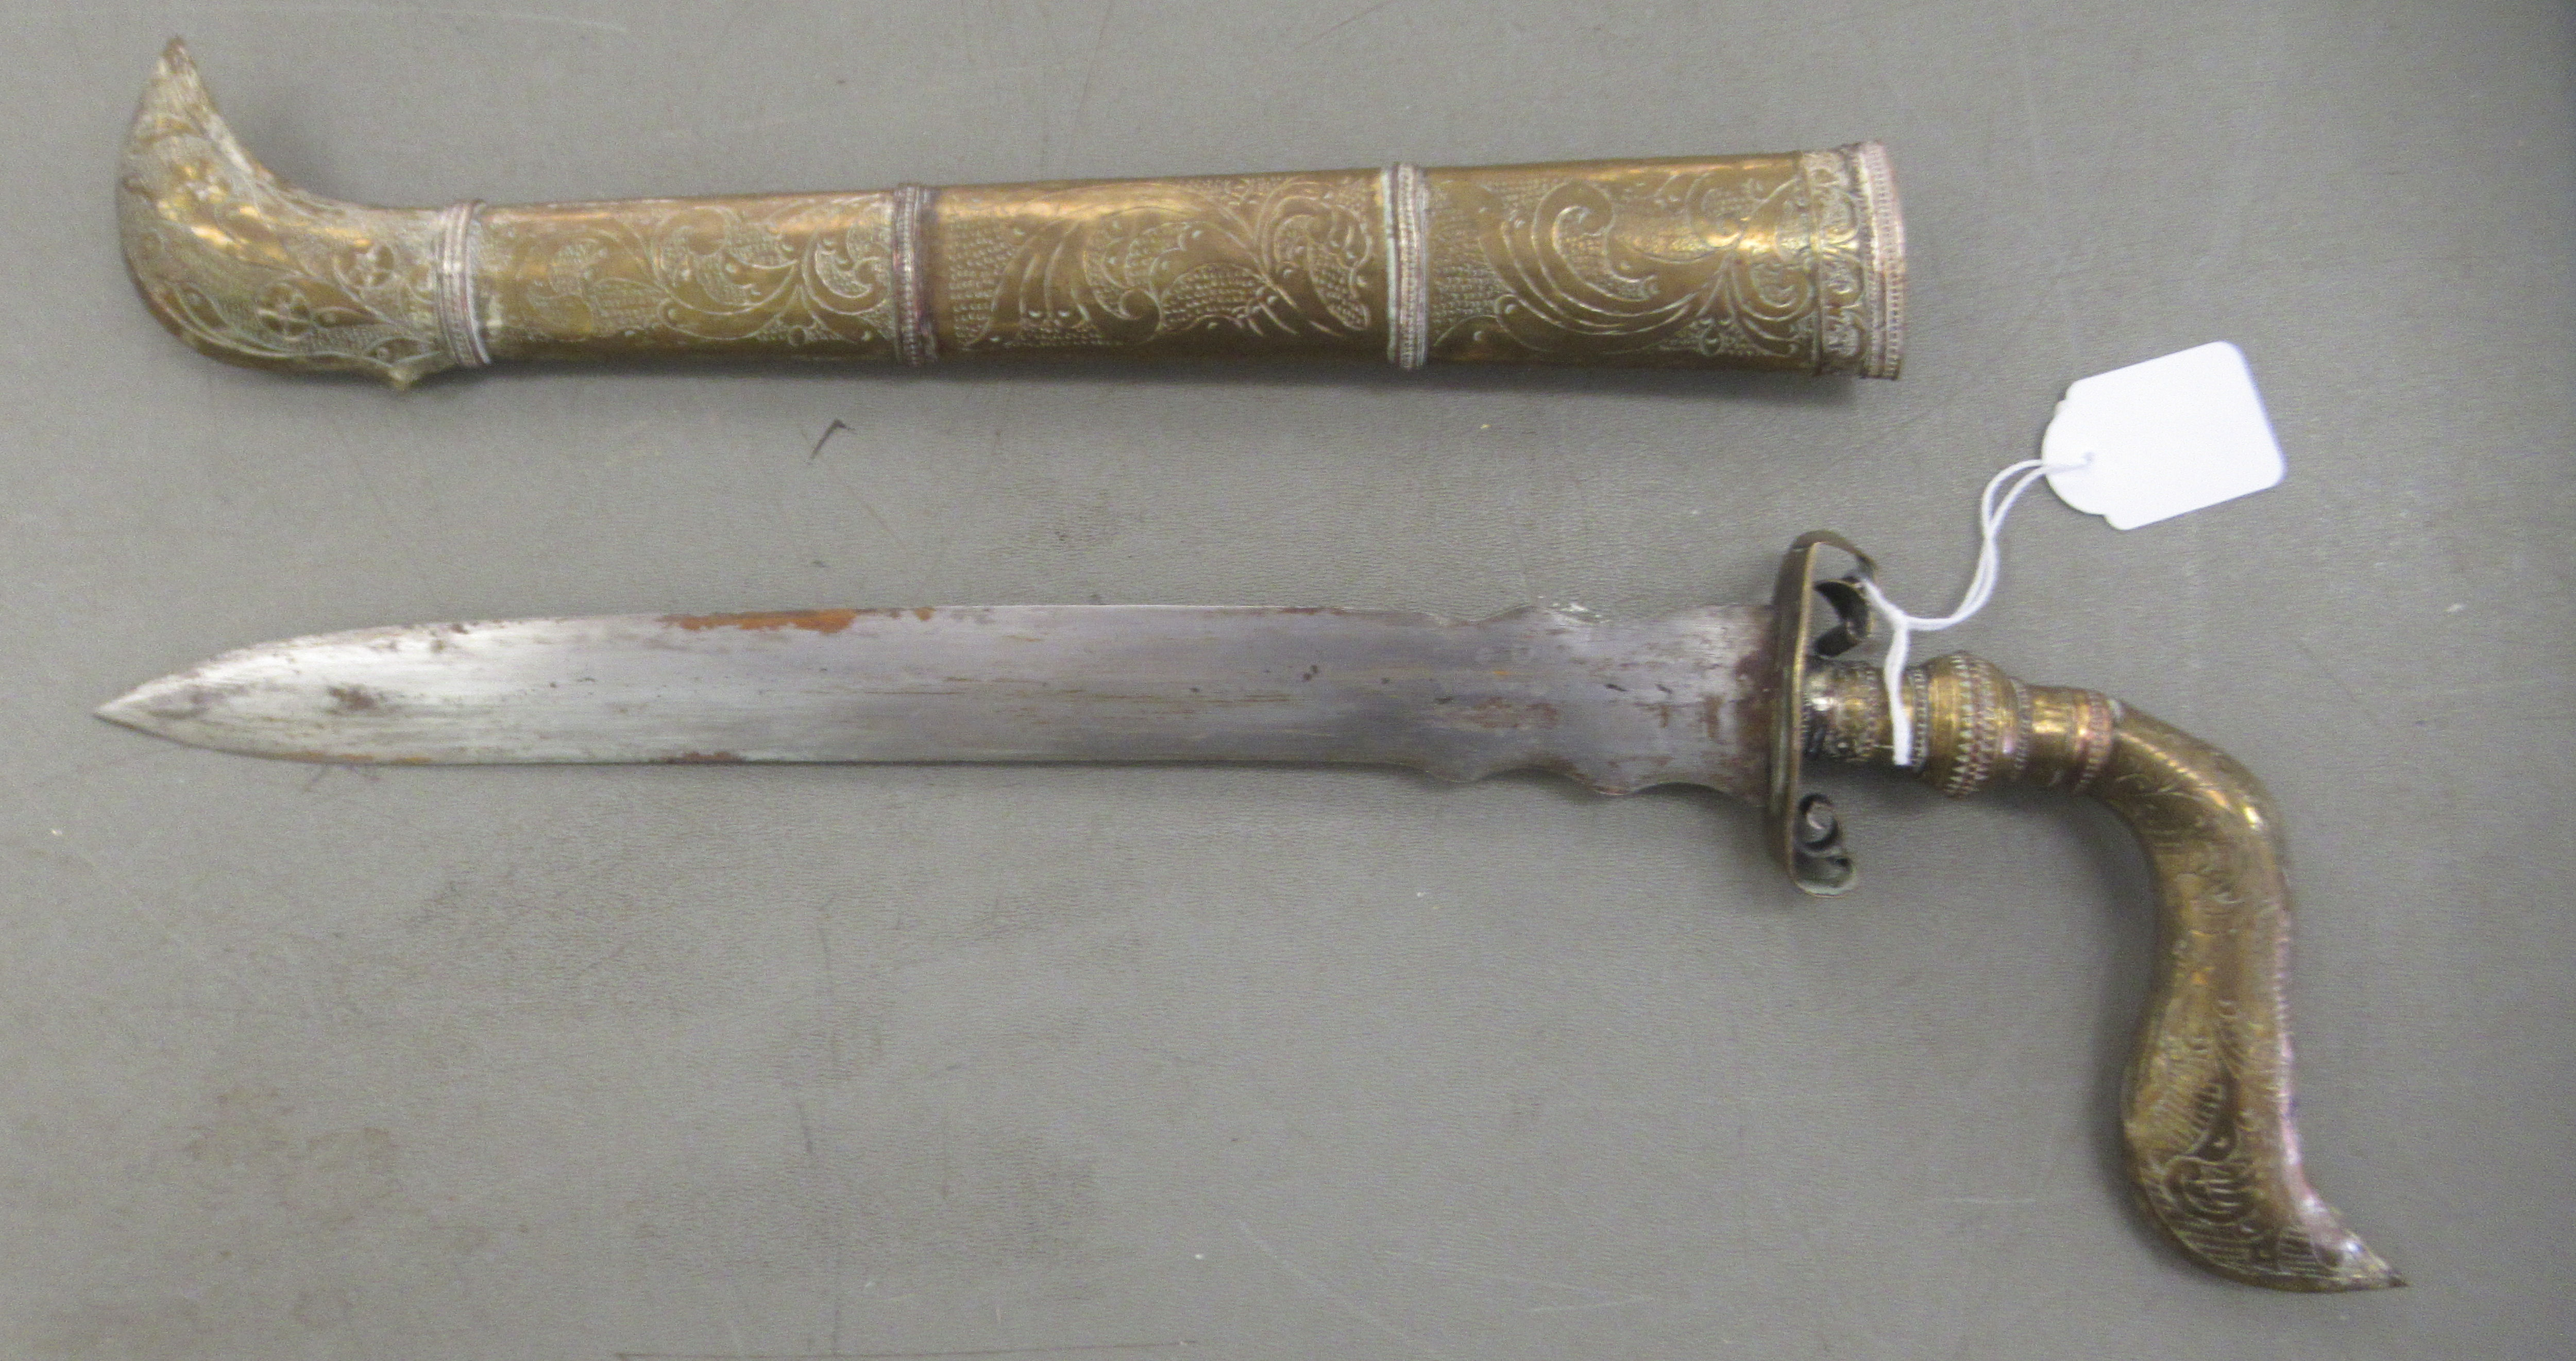 An Indo-Persian dagger with an engraved brass handle, scrolled guard and straight, part wavy edged